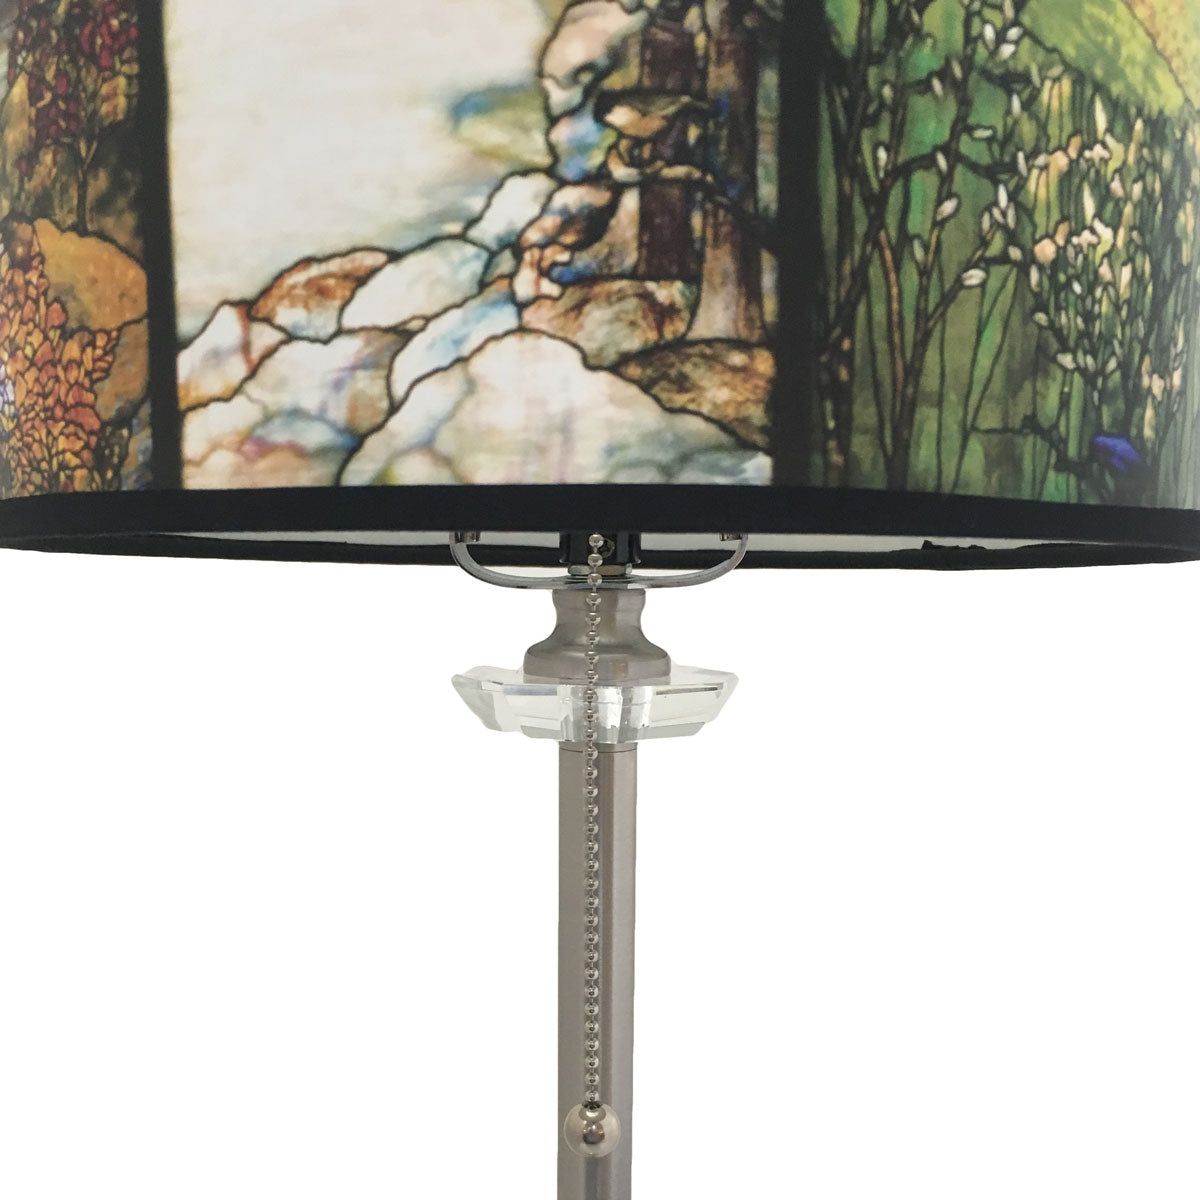 Royal Designs 28" Crystal and Brushed Nickel Buffet Lamp with Four Seasons Stained Glass Design Hard Back Lamp Shade, Set of 2